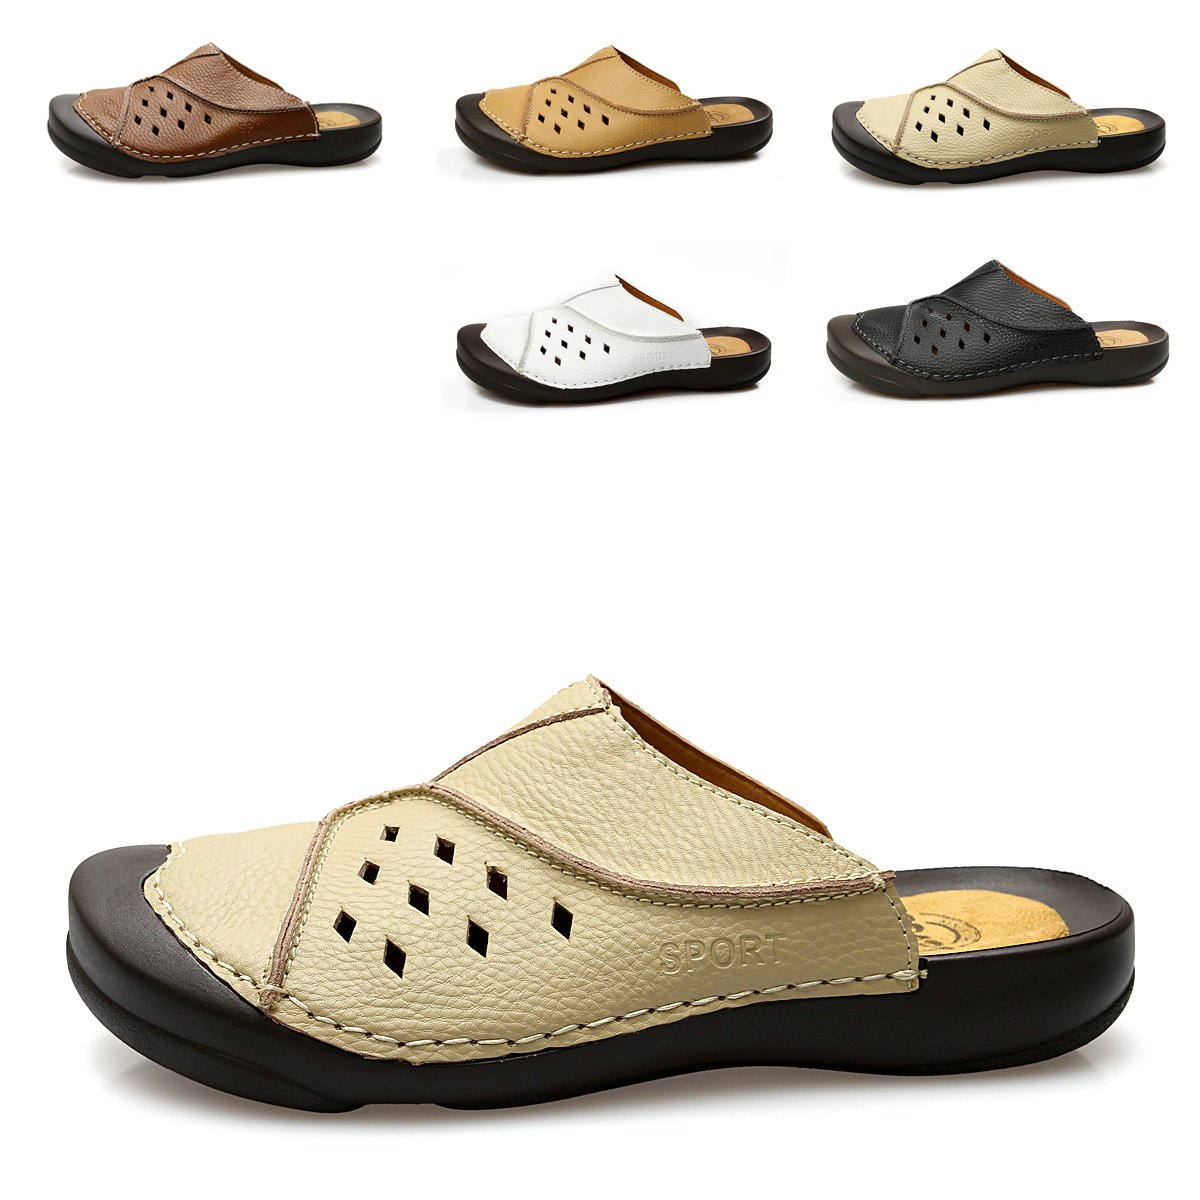 new-leisure-beach-shoes-for-men-cow-leather-axido-size-38-44-Yellow ...